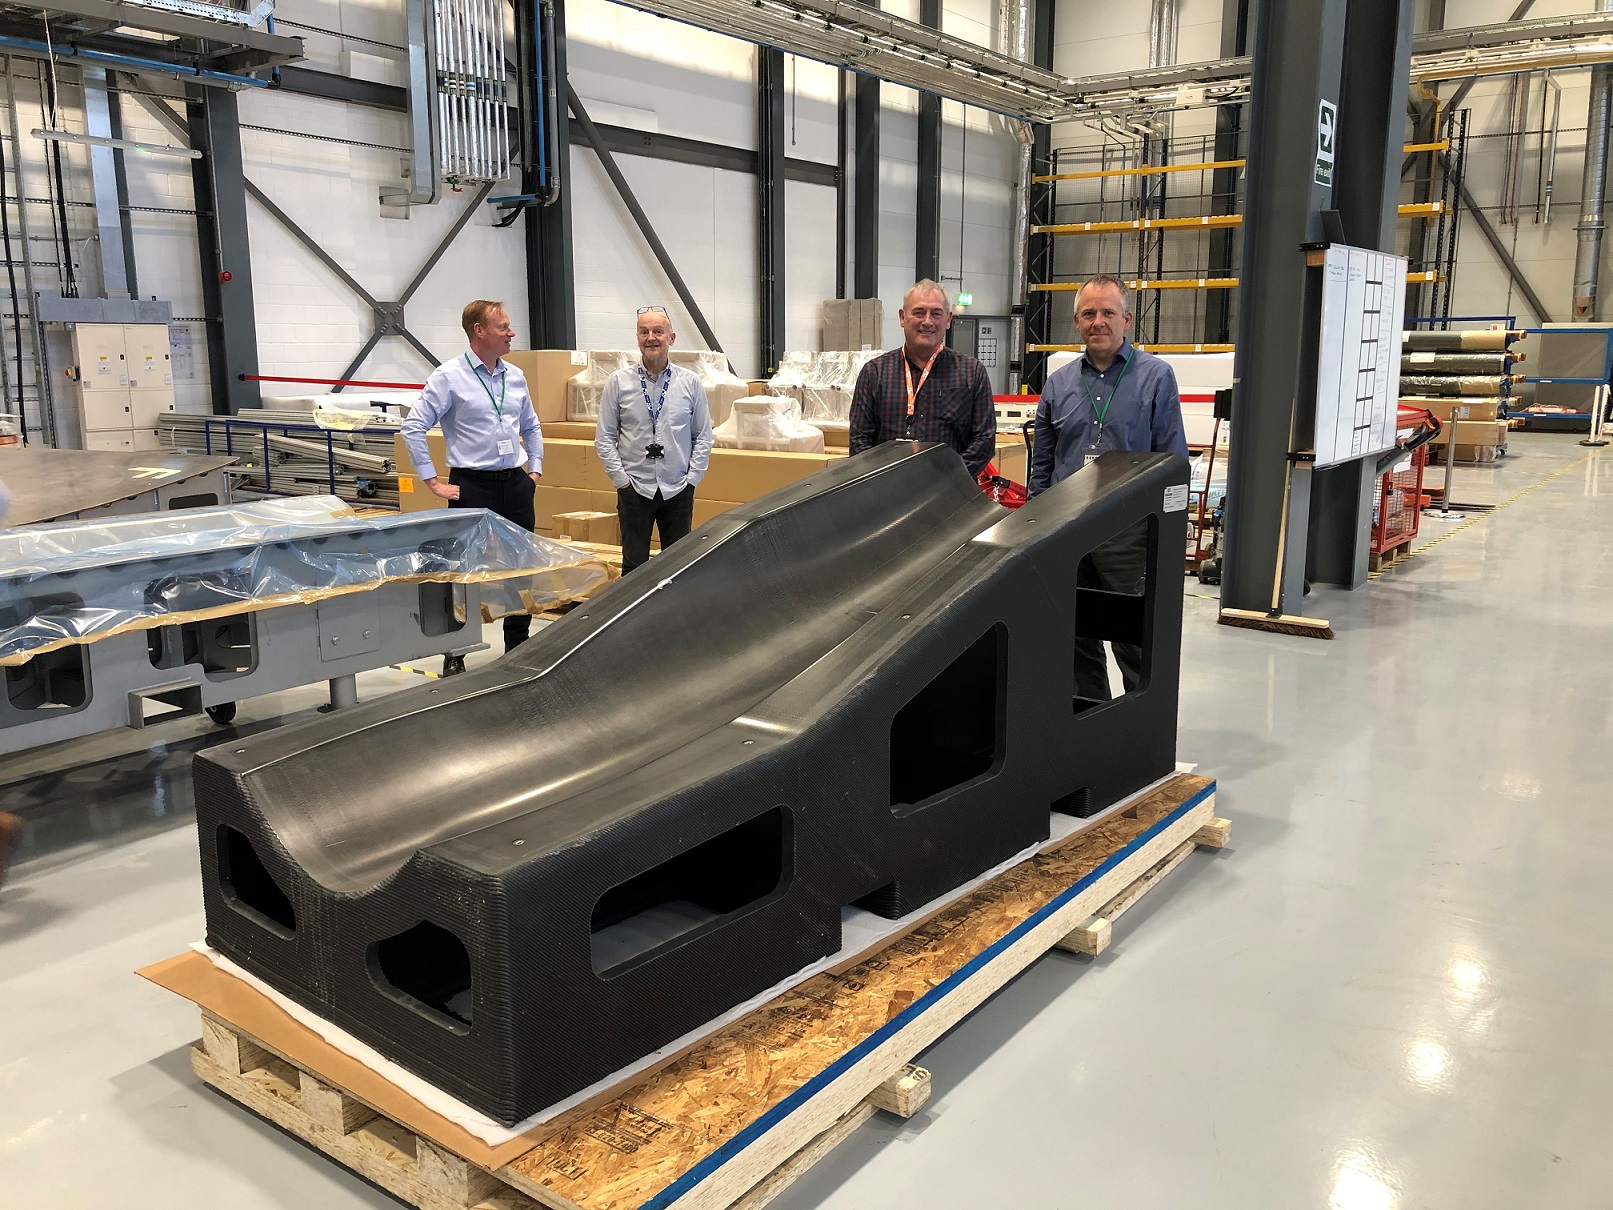 BAE Systems printed the mold tool on a MasterPrint large format 3D printing platform.